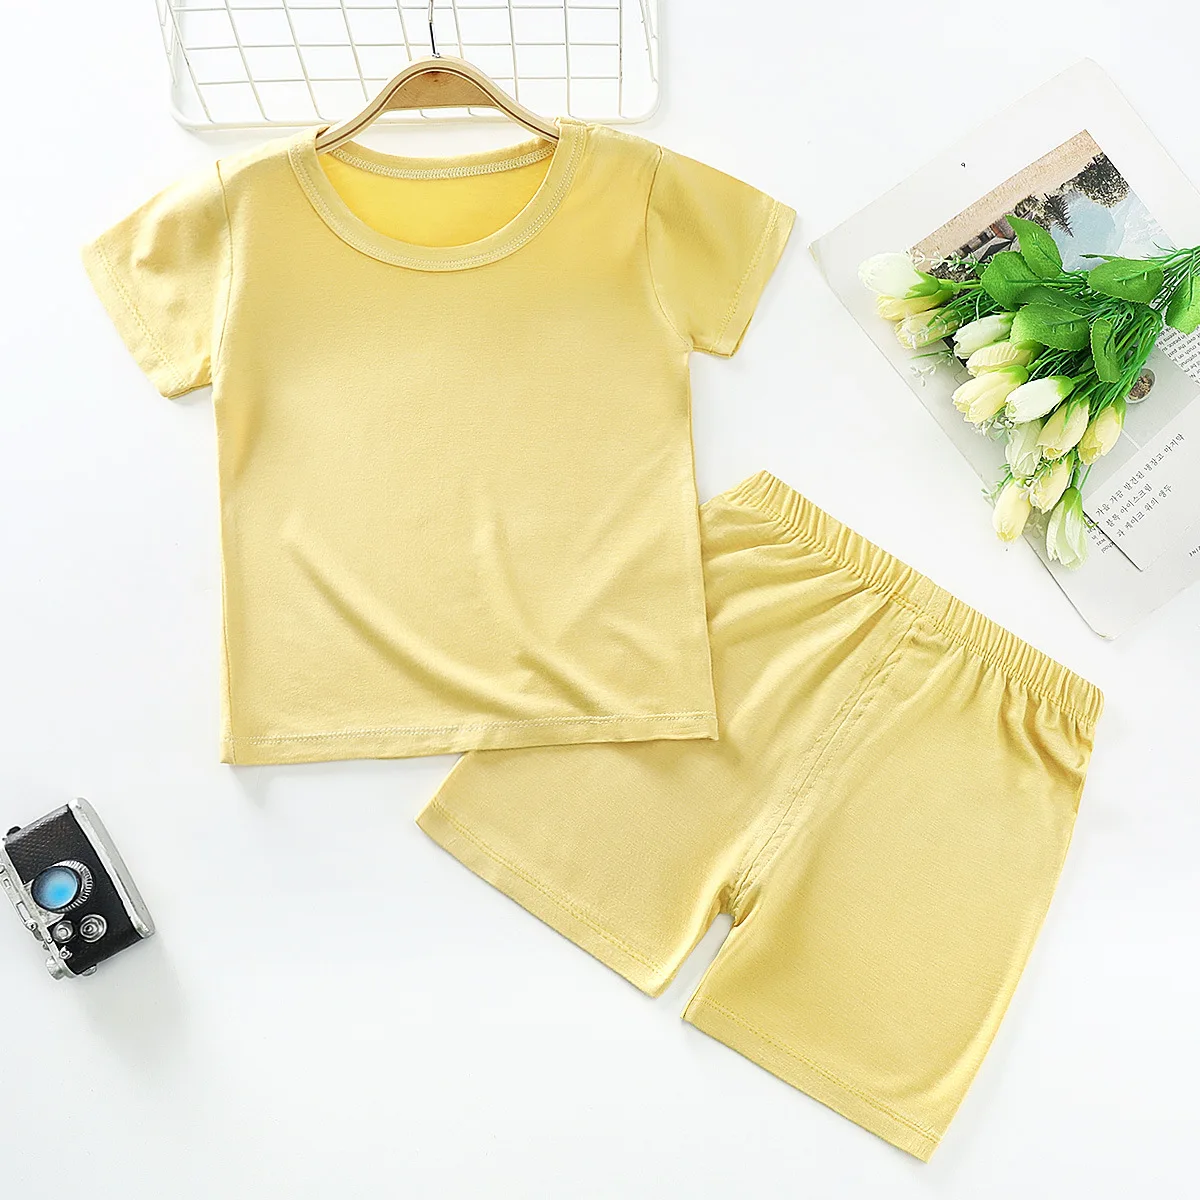 Wholesale baby boy clothes 2 pcs set toddler summer baby boy t shirt shorts boys boutique outfits